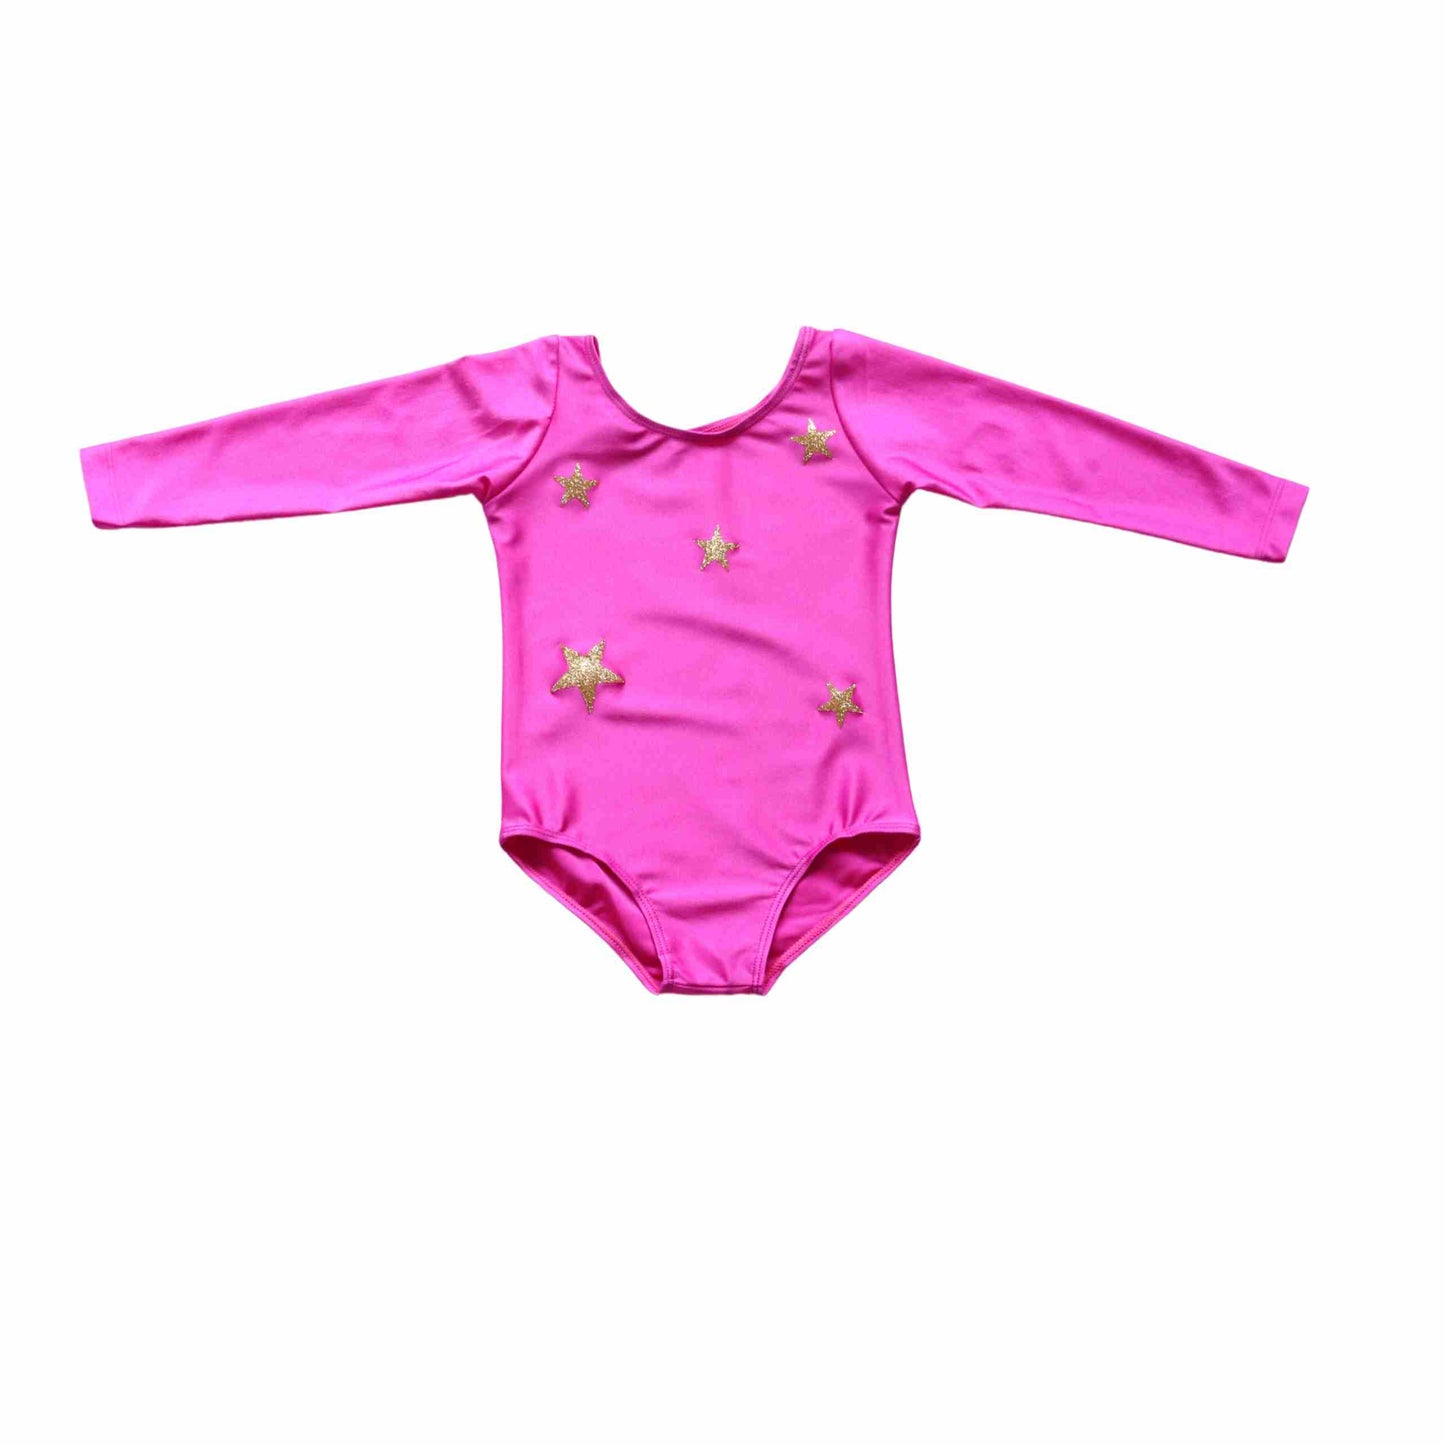 All Star Costume Set, Pink/Gold